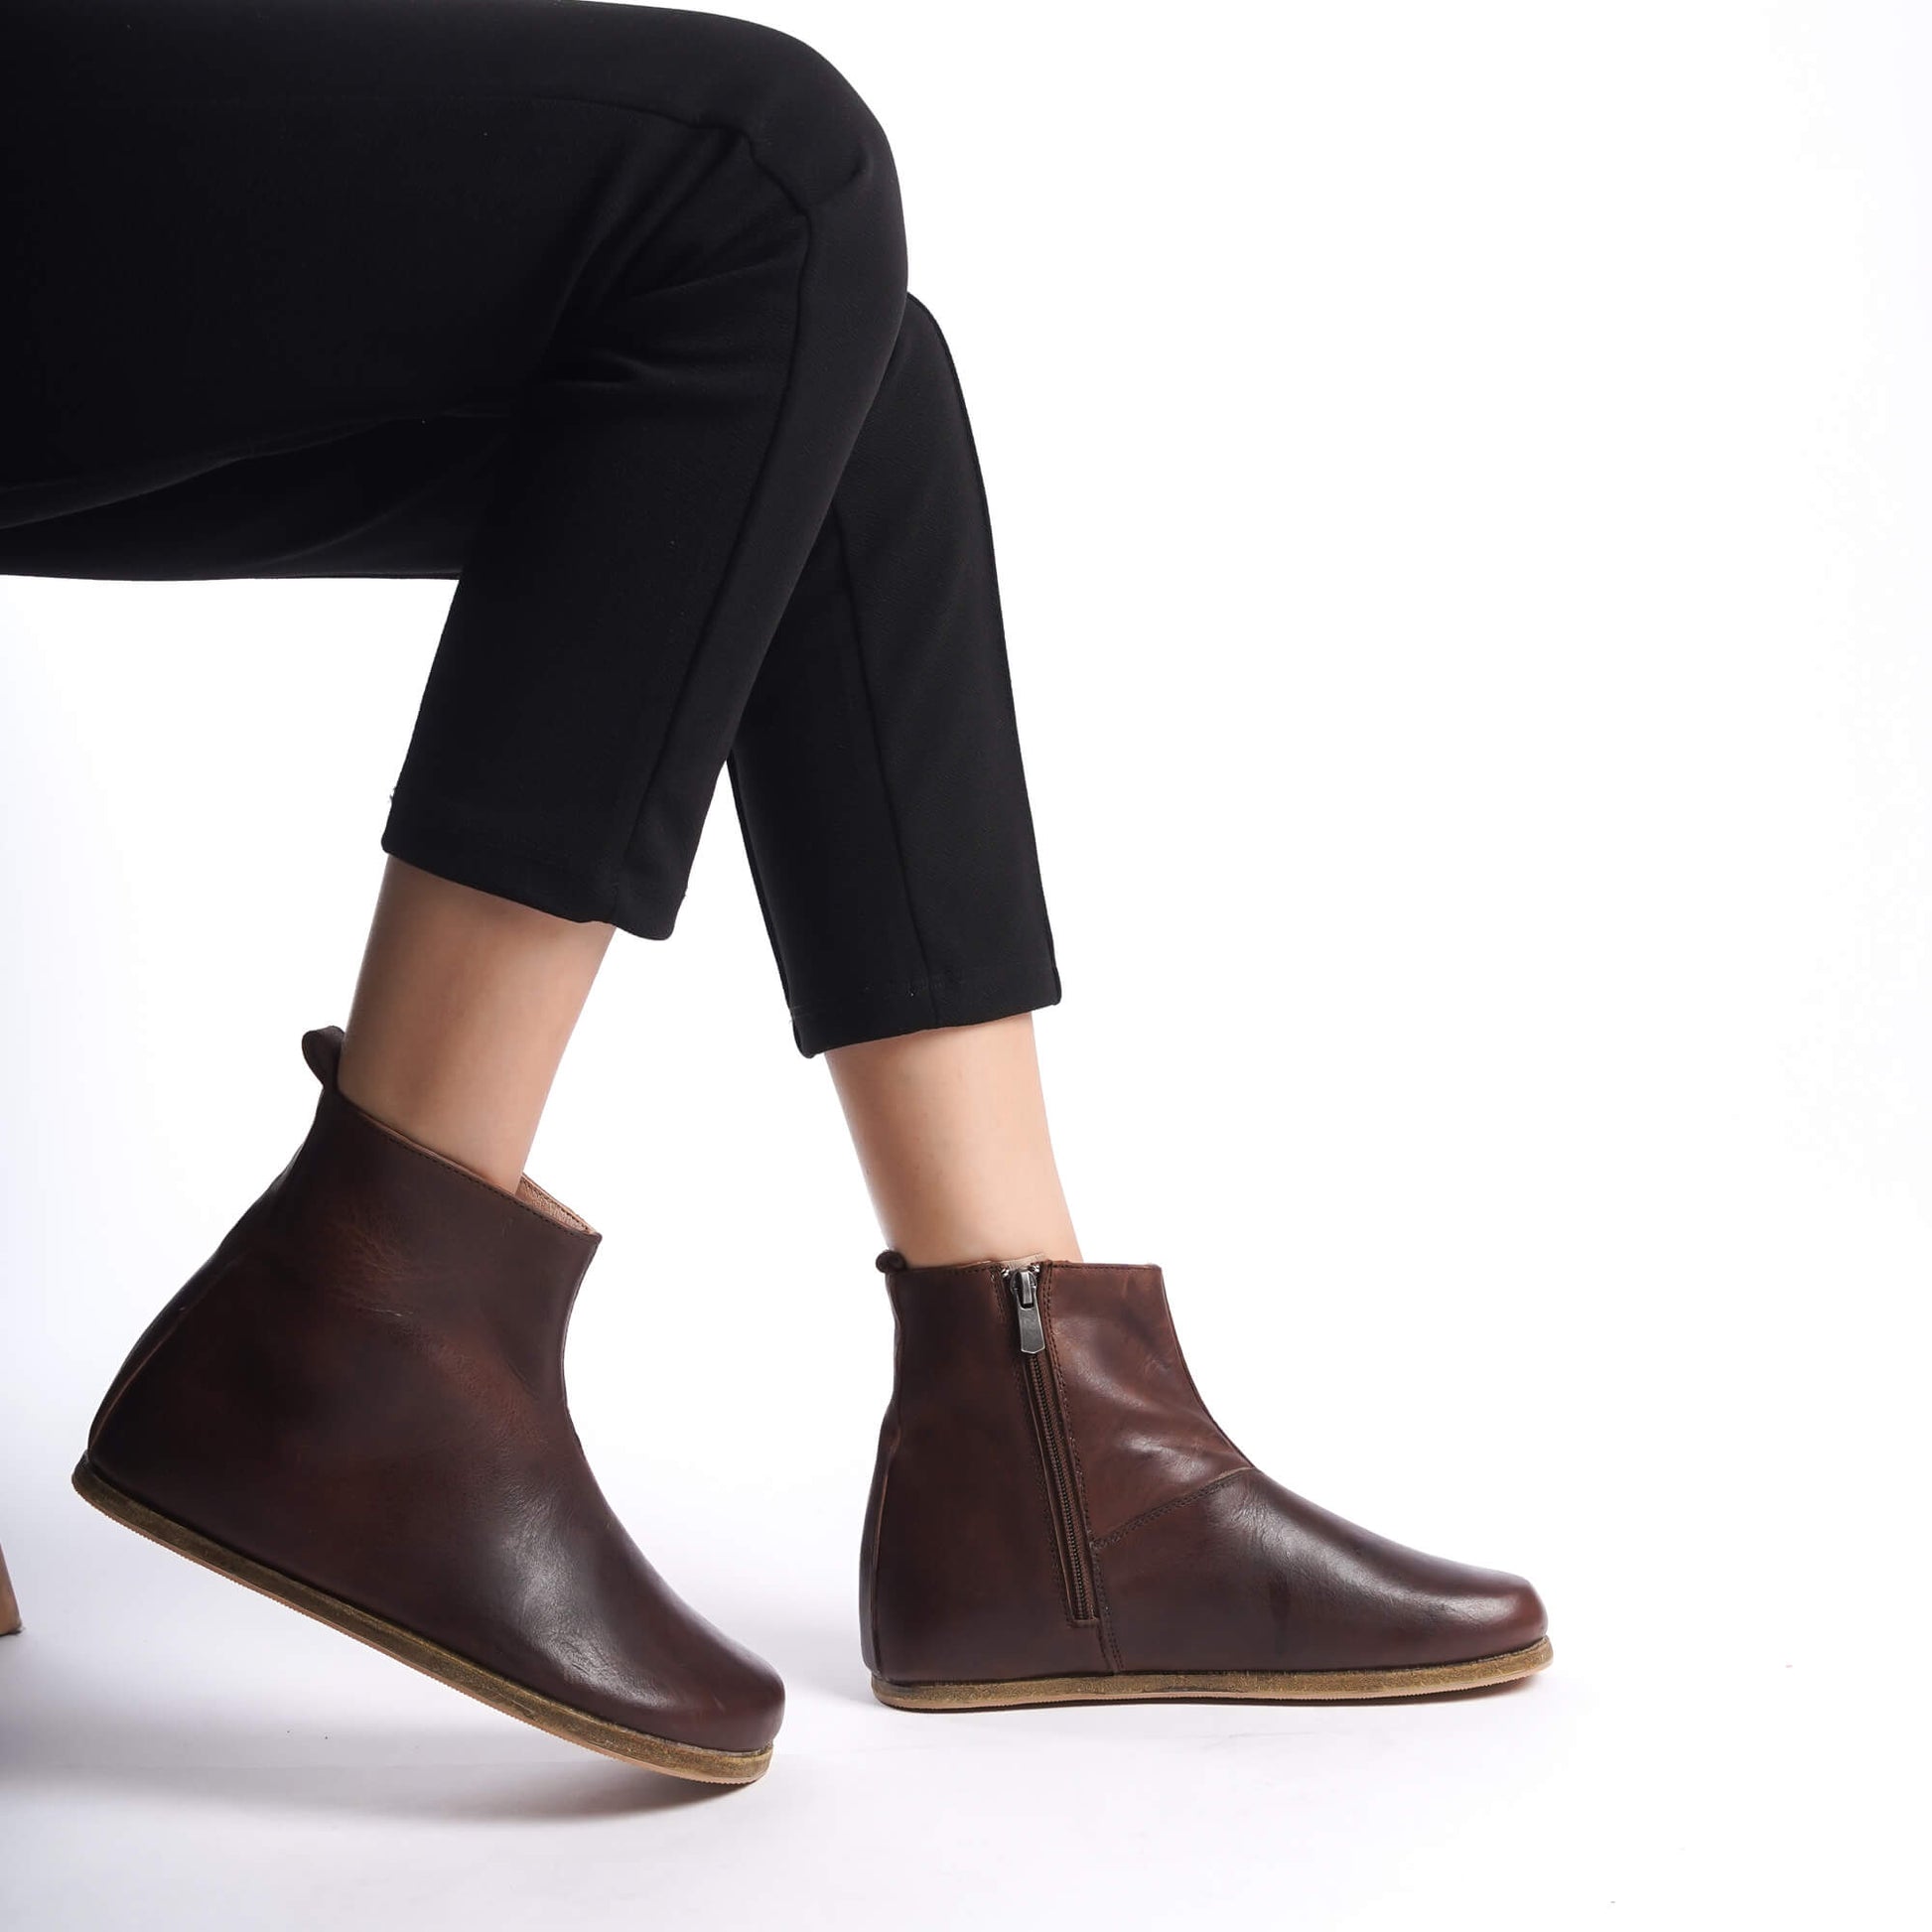 Stylish tan brown leather boots for women, featuring a wide toe box and ergonomic soles. Perfect minimalist design for natural walking and earthing.